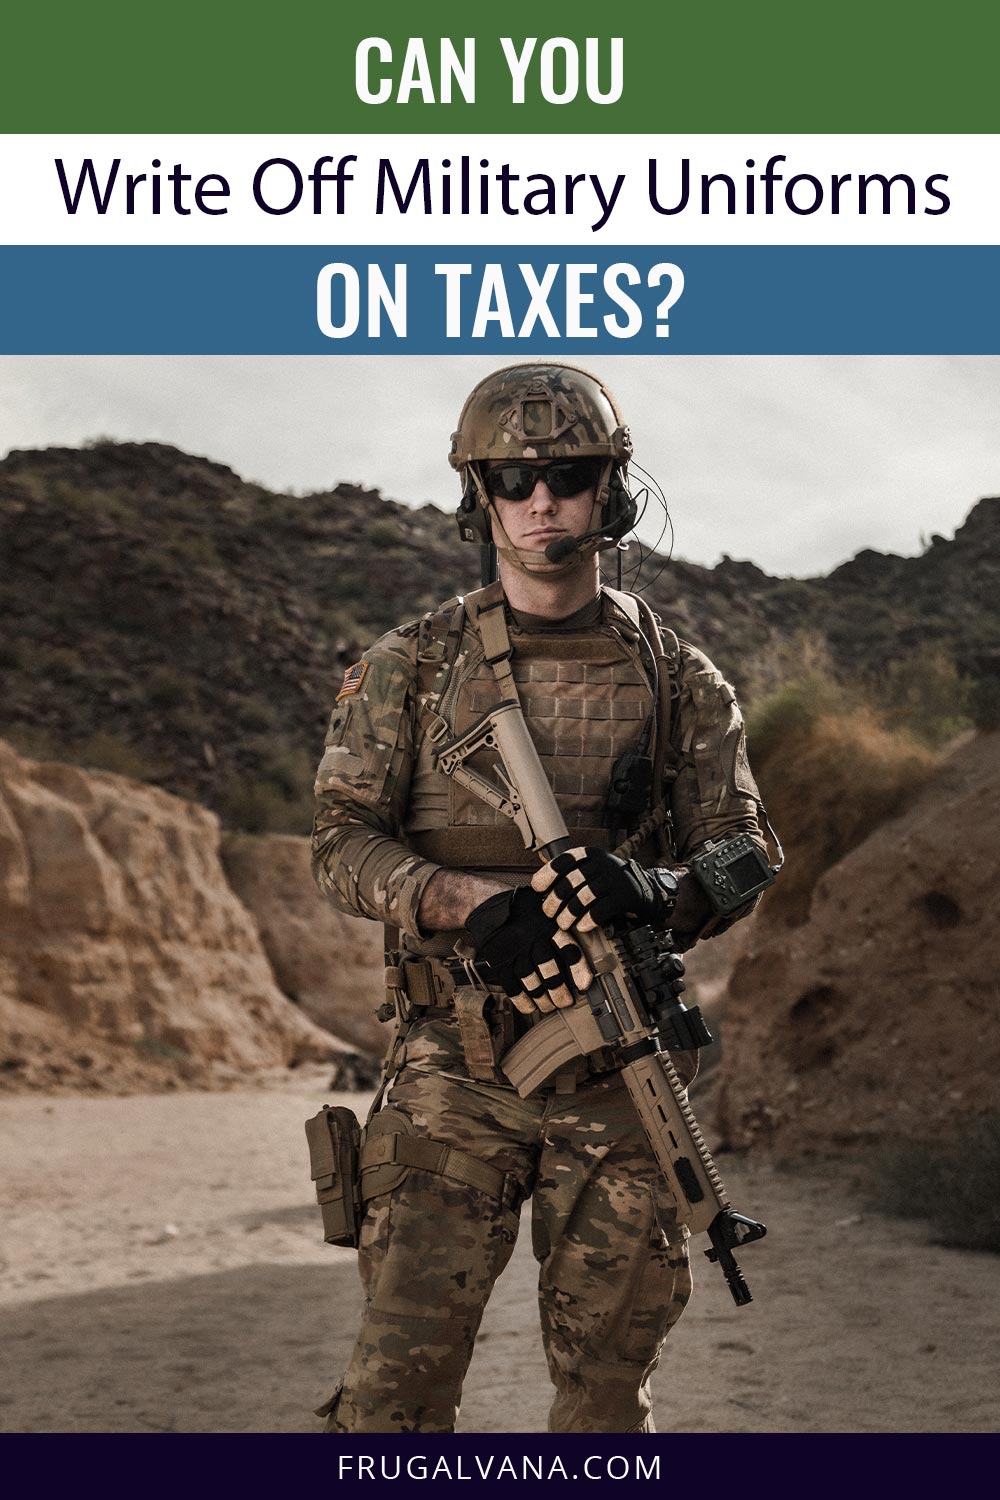 Can You Write Off Military Uniforms on Taxes?